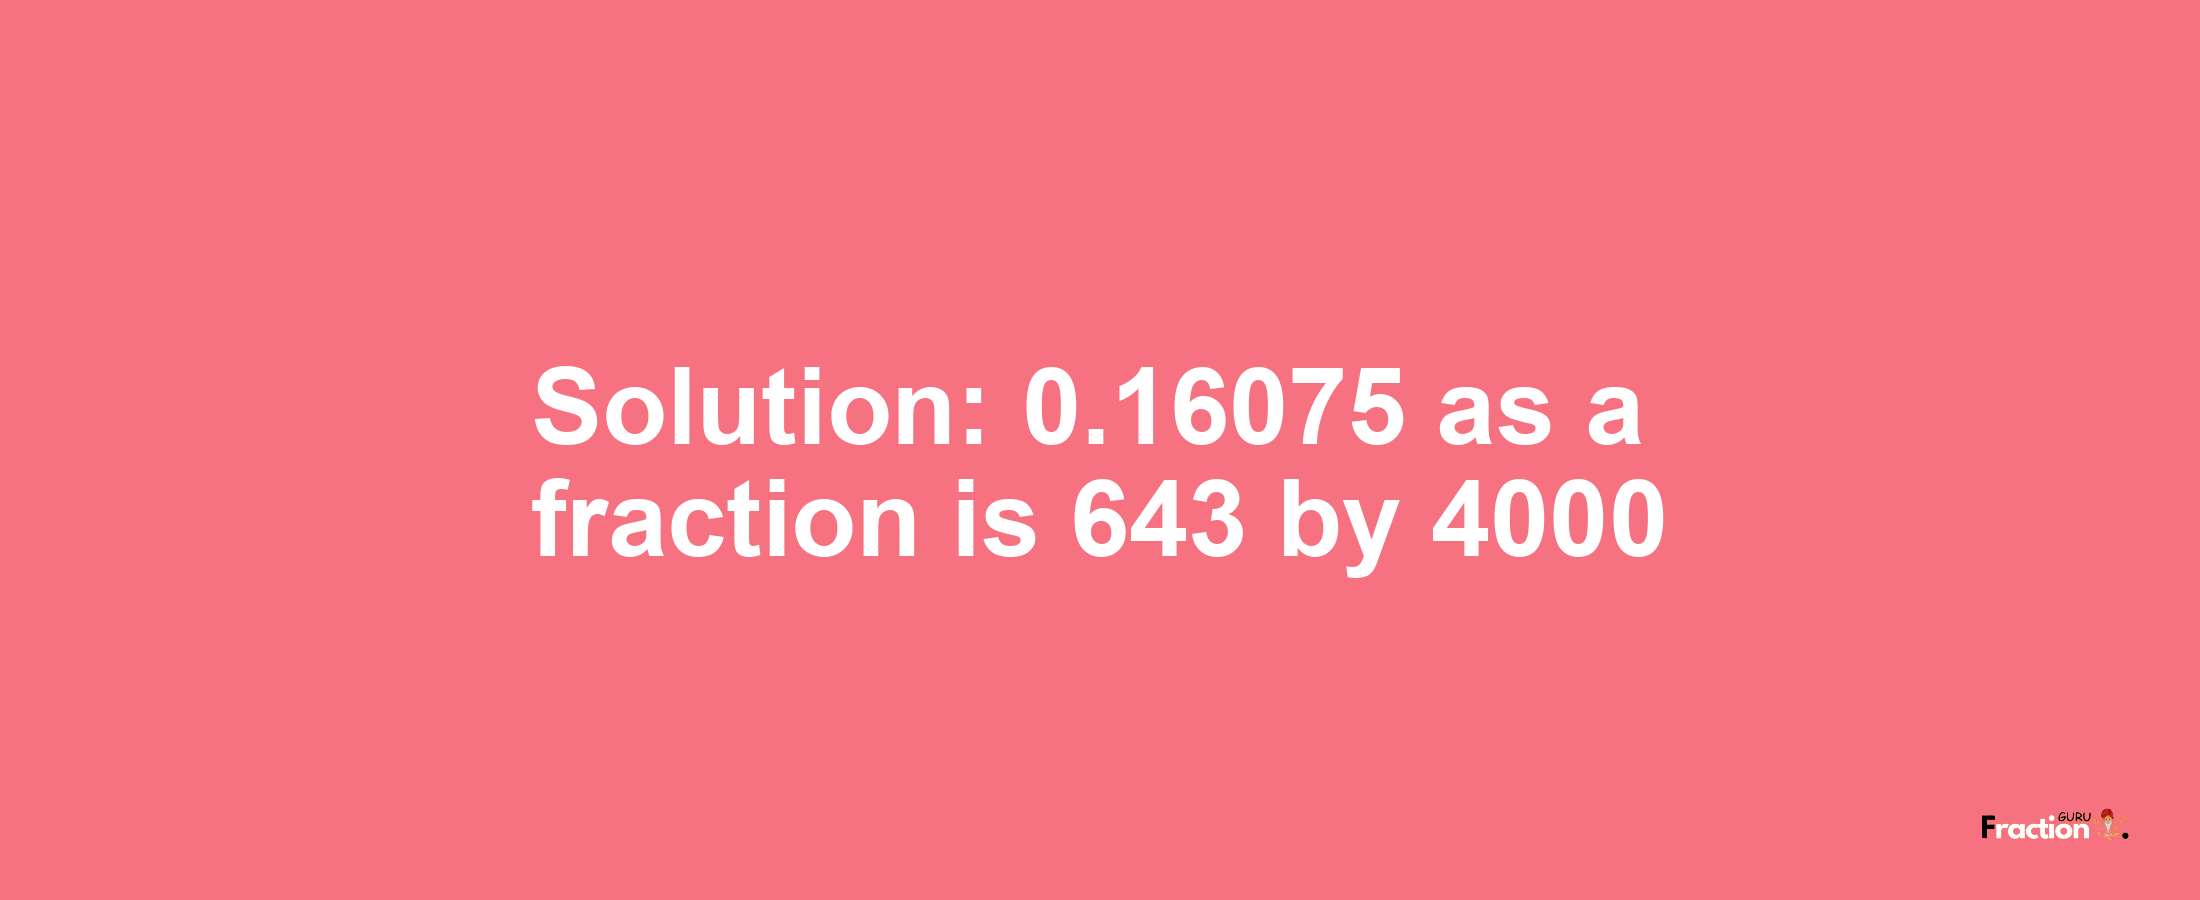 Solution:0.16075 as a fraction is 643/4000